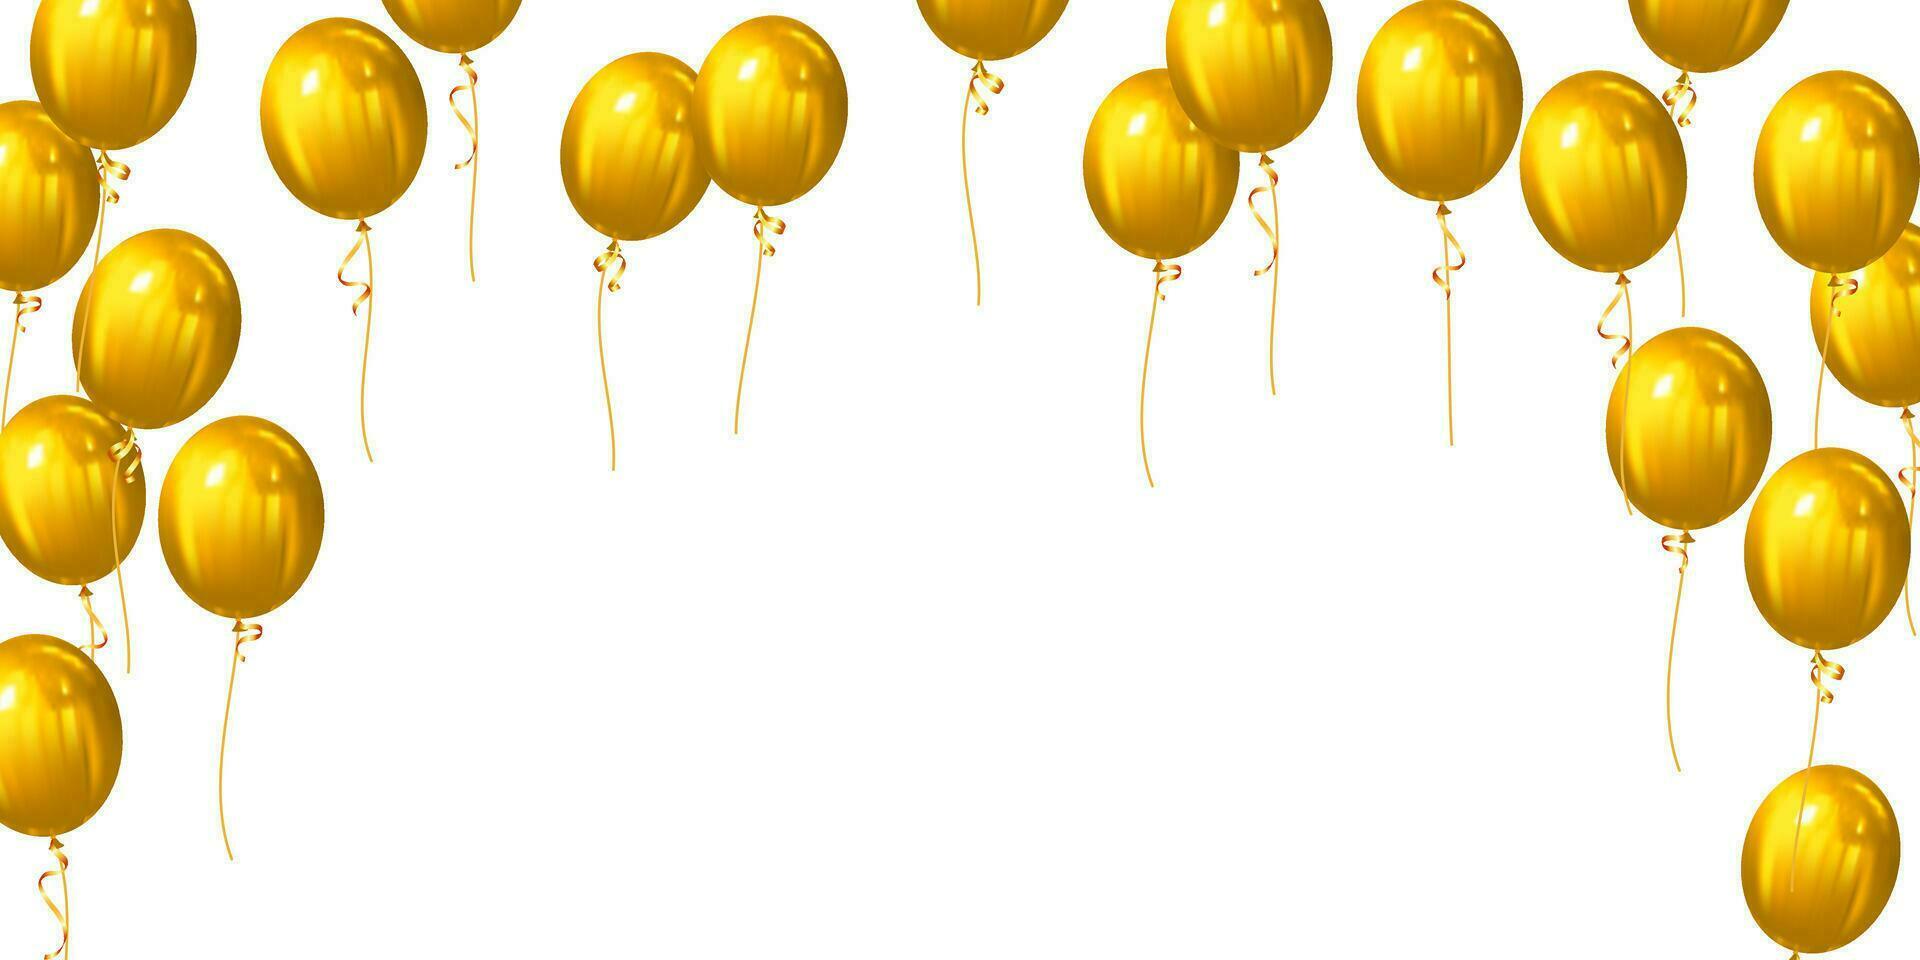 celebration and sale banner with gold balloons background vector illustration